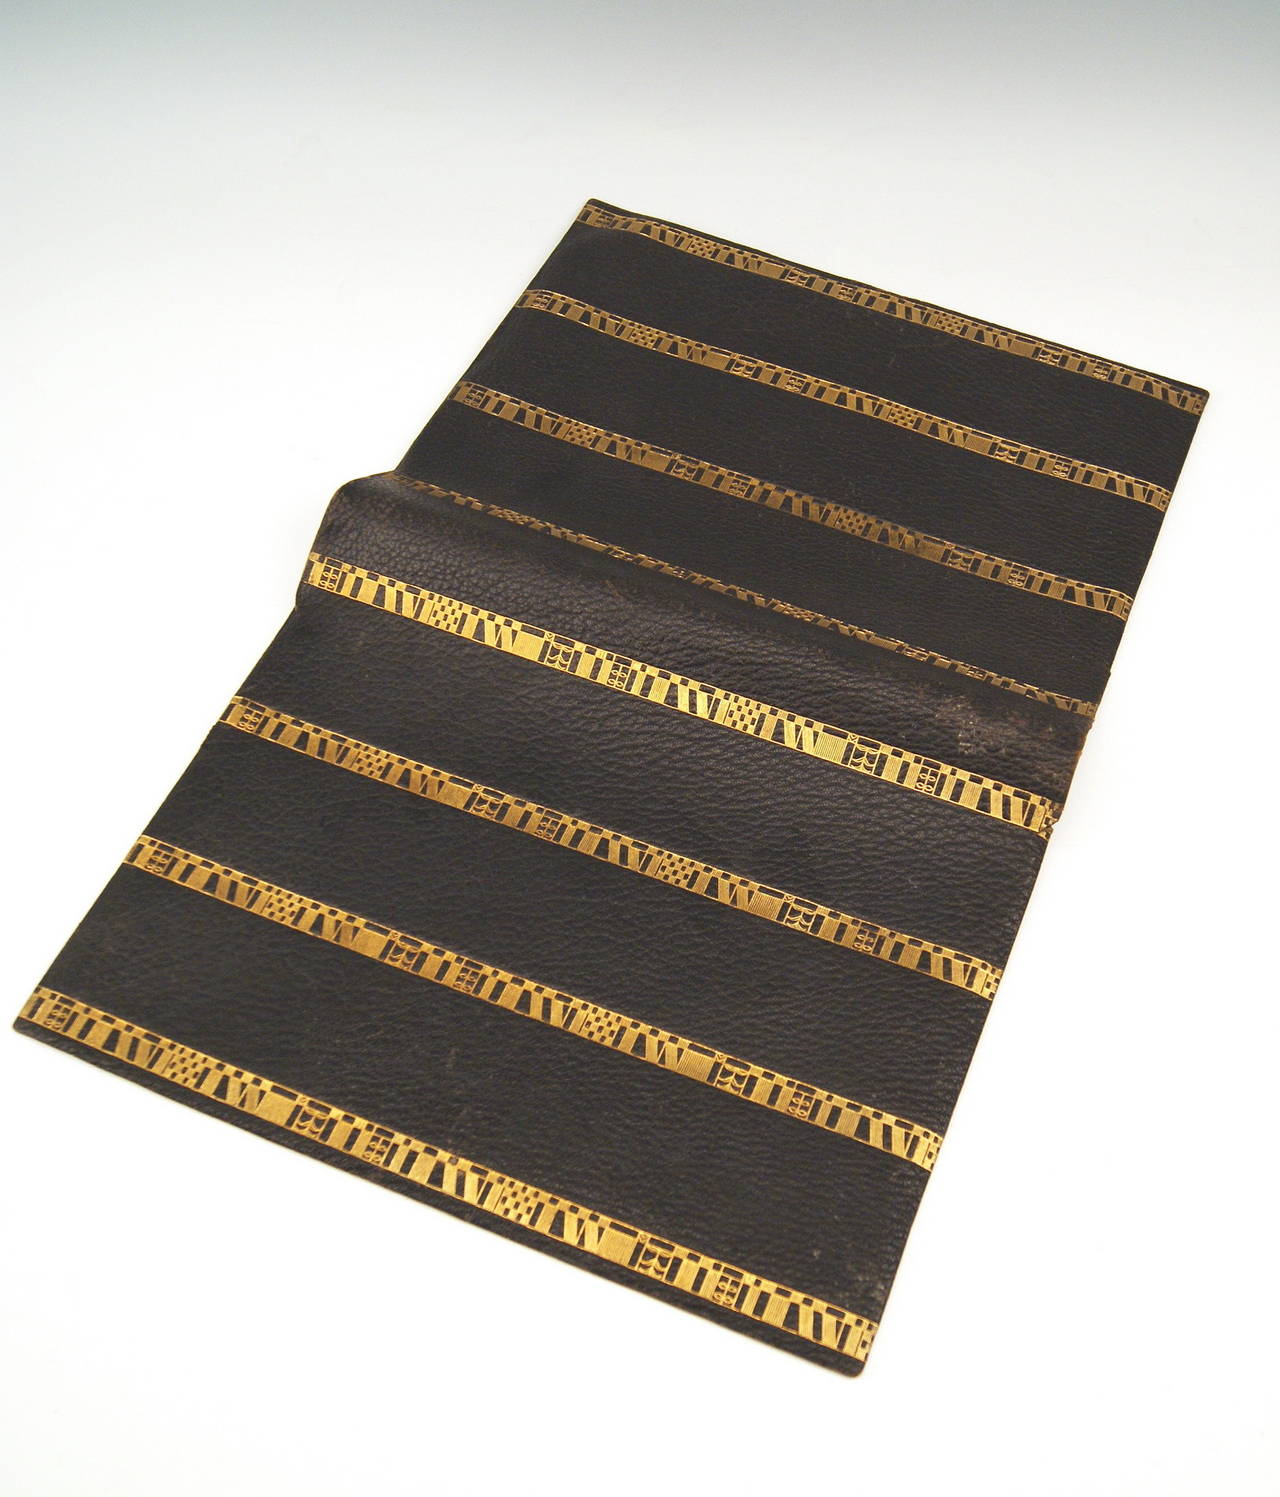 Austrian Josef Hoffmann Vienna's Workshops Leather Cover for Documents, circa 1925